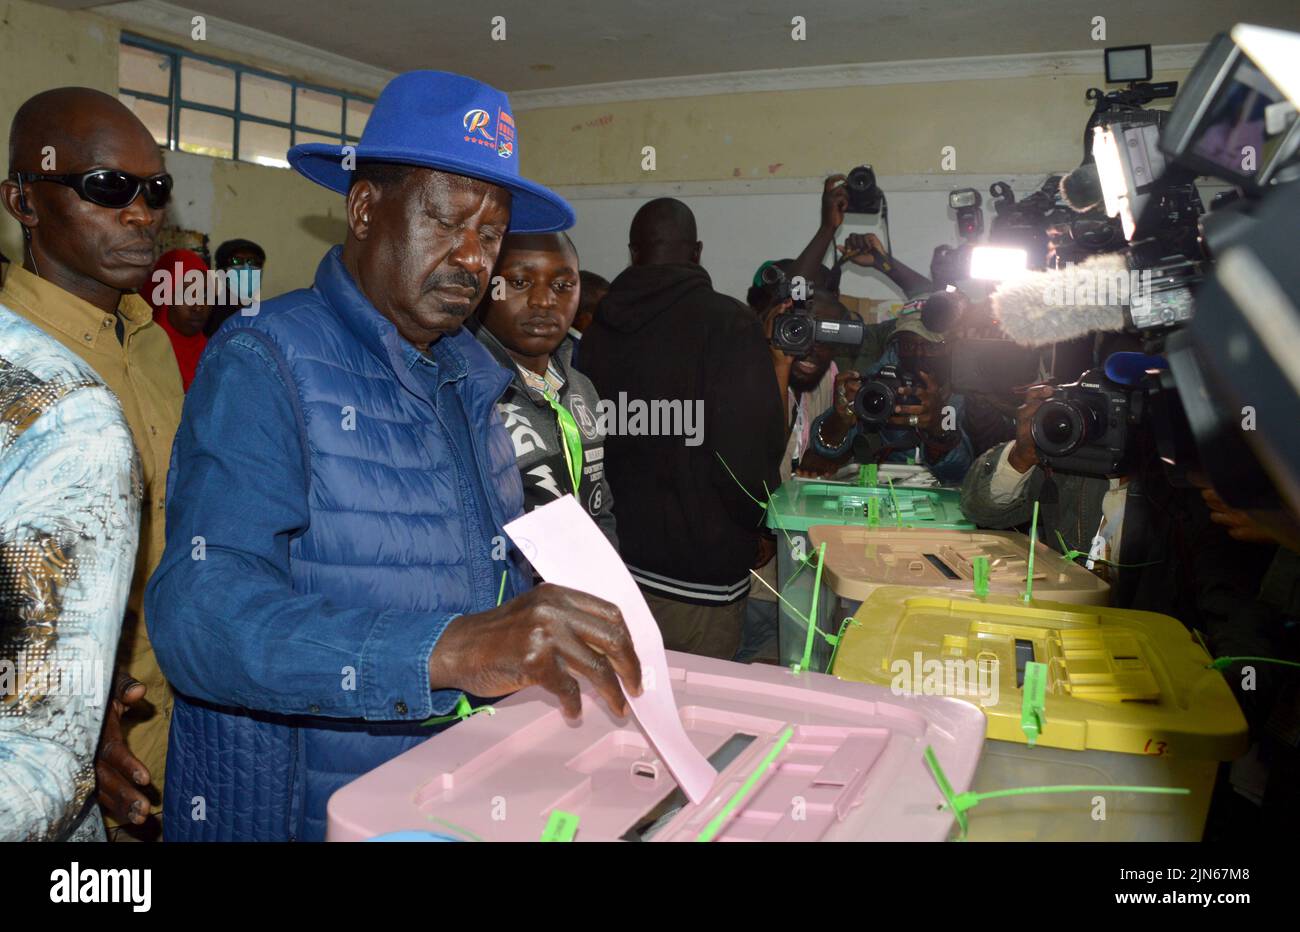 Nairobi, Kenya. 9th Aug, 2022. Raila Odinga, a veteran opposition leader who is running for the presidency under the Azimio La Umoja (Resolution for Unity) One Kenya Coalition, casts his ballot at a polling station in Nairobi, Kenya, Aug. 9, 2022. Millions of Kenyan citizens on Tuesday morning cast their ballots at about 46,229 polling stations across the country to elect their fifth president as well as members of the National Assembly, senators, and county governors. Credit: Charles Onyango/Xinhua/Alamy Live News Stock Photo